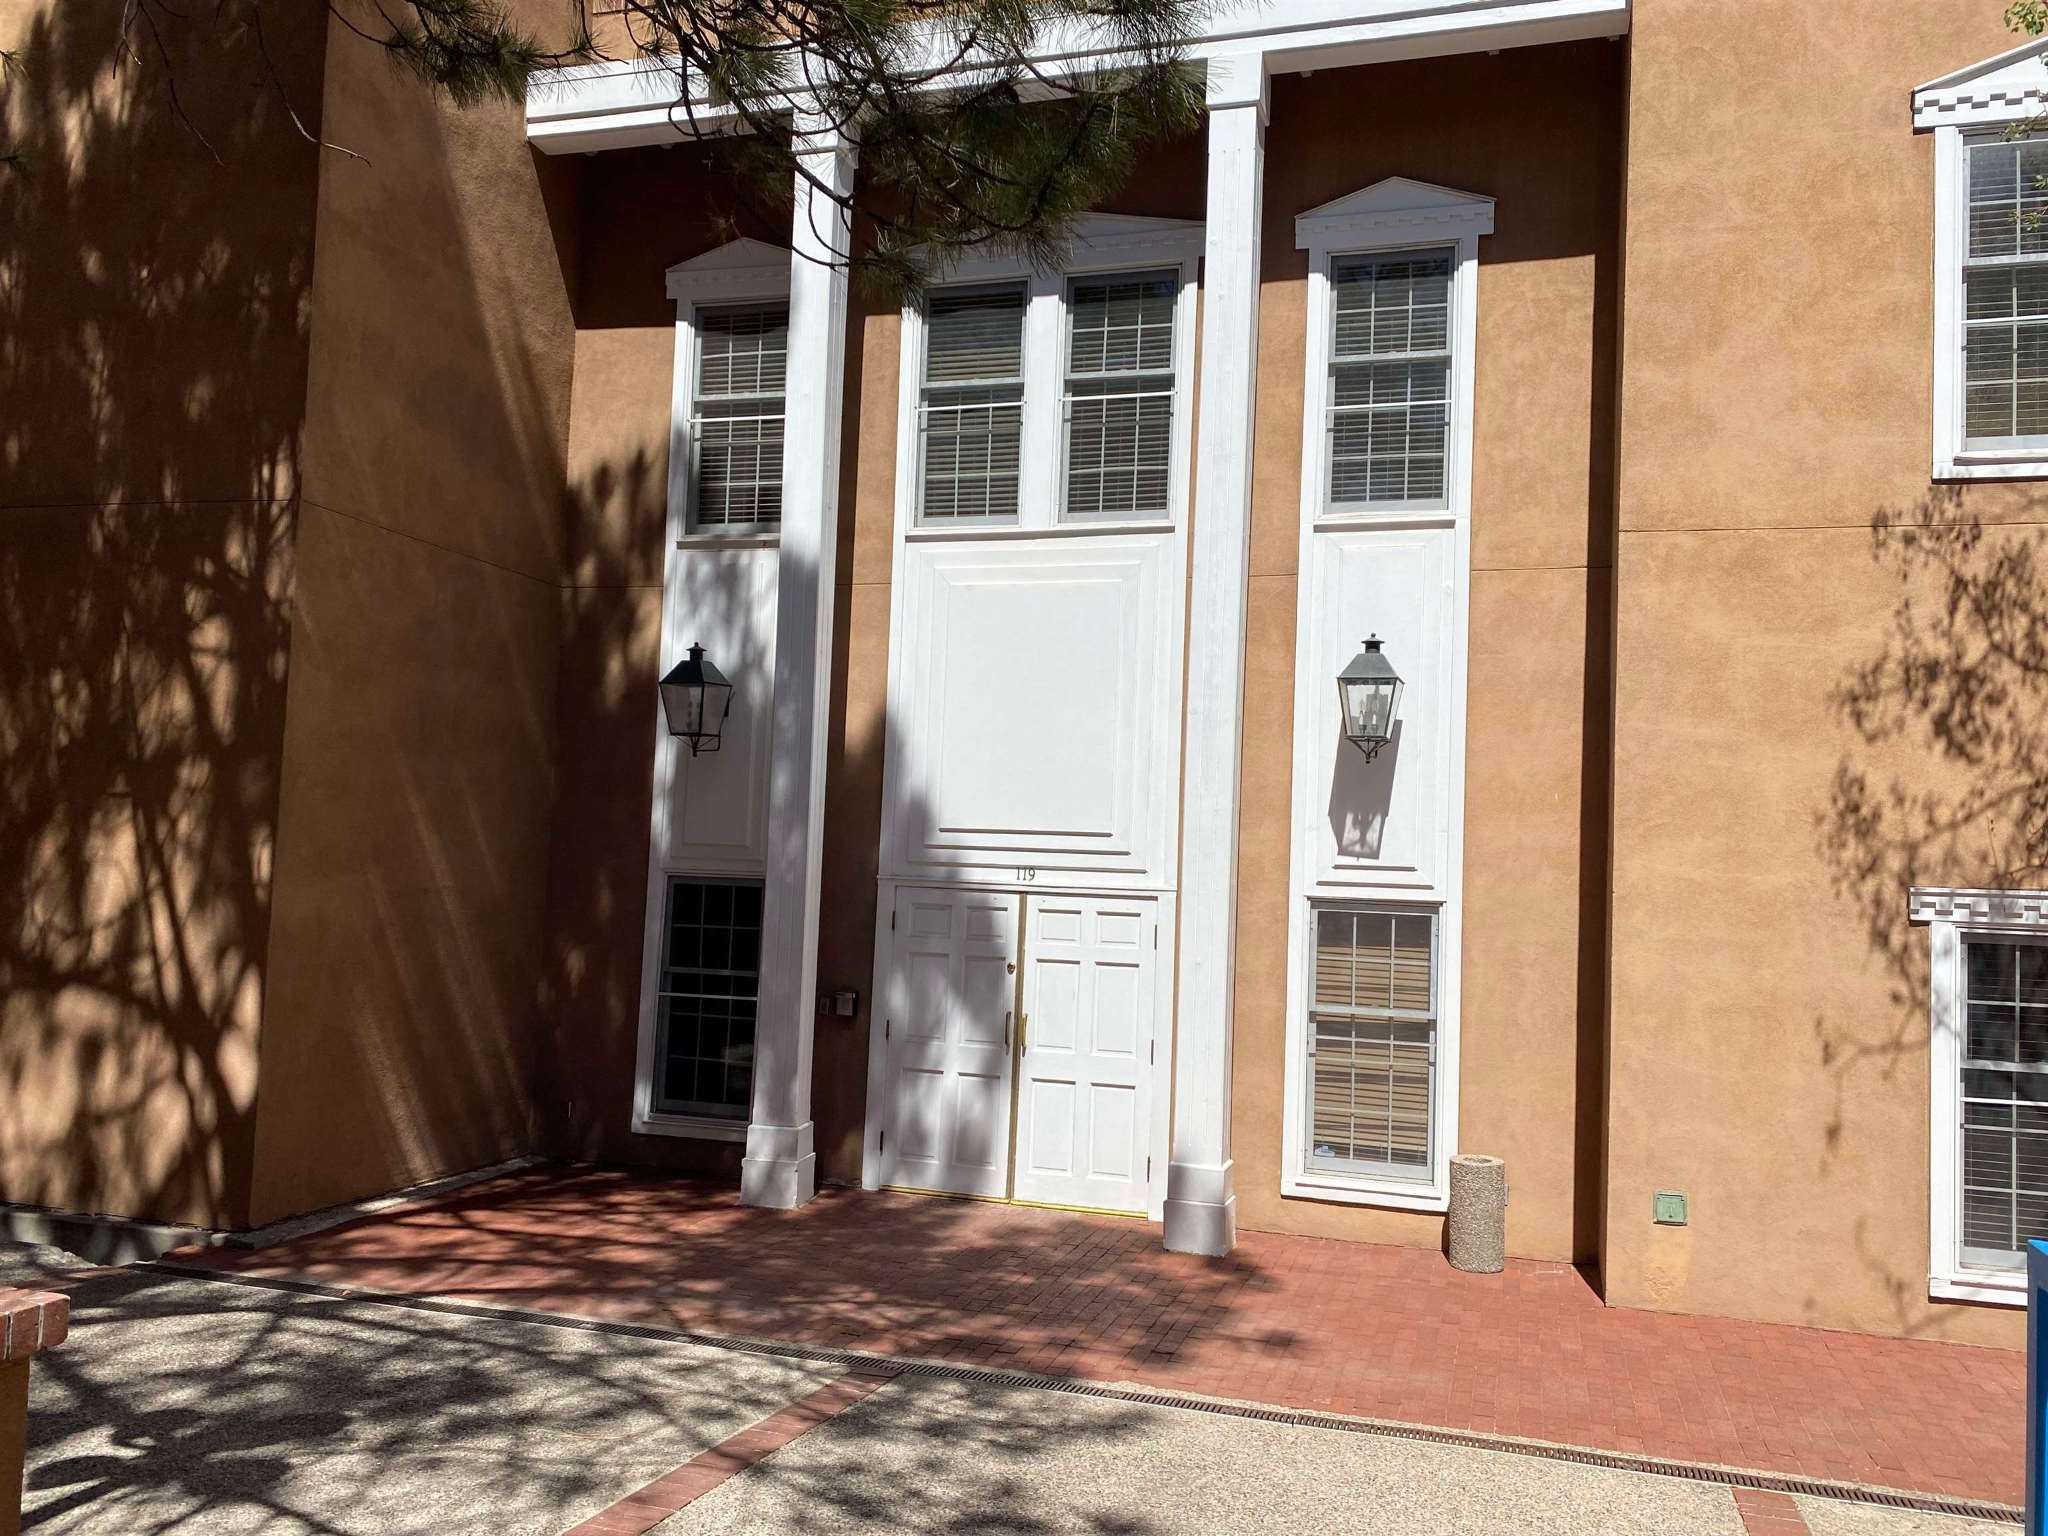 123 Marcy Suite 201, Santa Fe, New Mexico 87501, ,Commercial Lease,For Rent,123 Marcy Suite 201,202202158